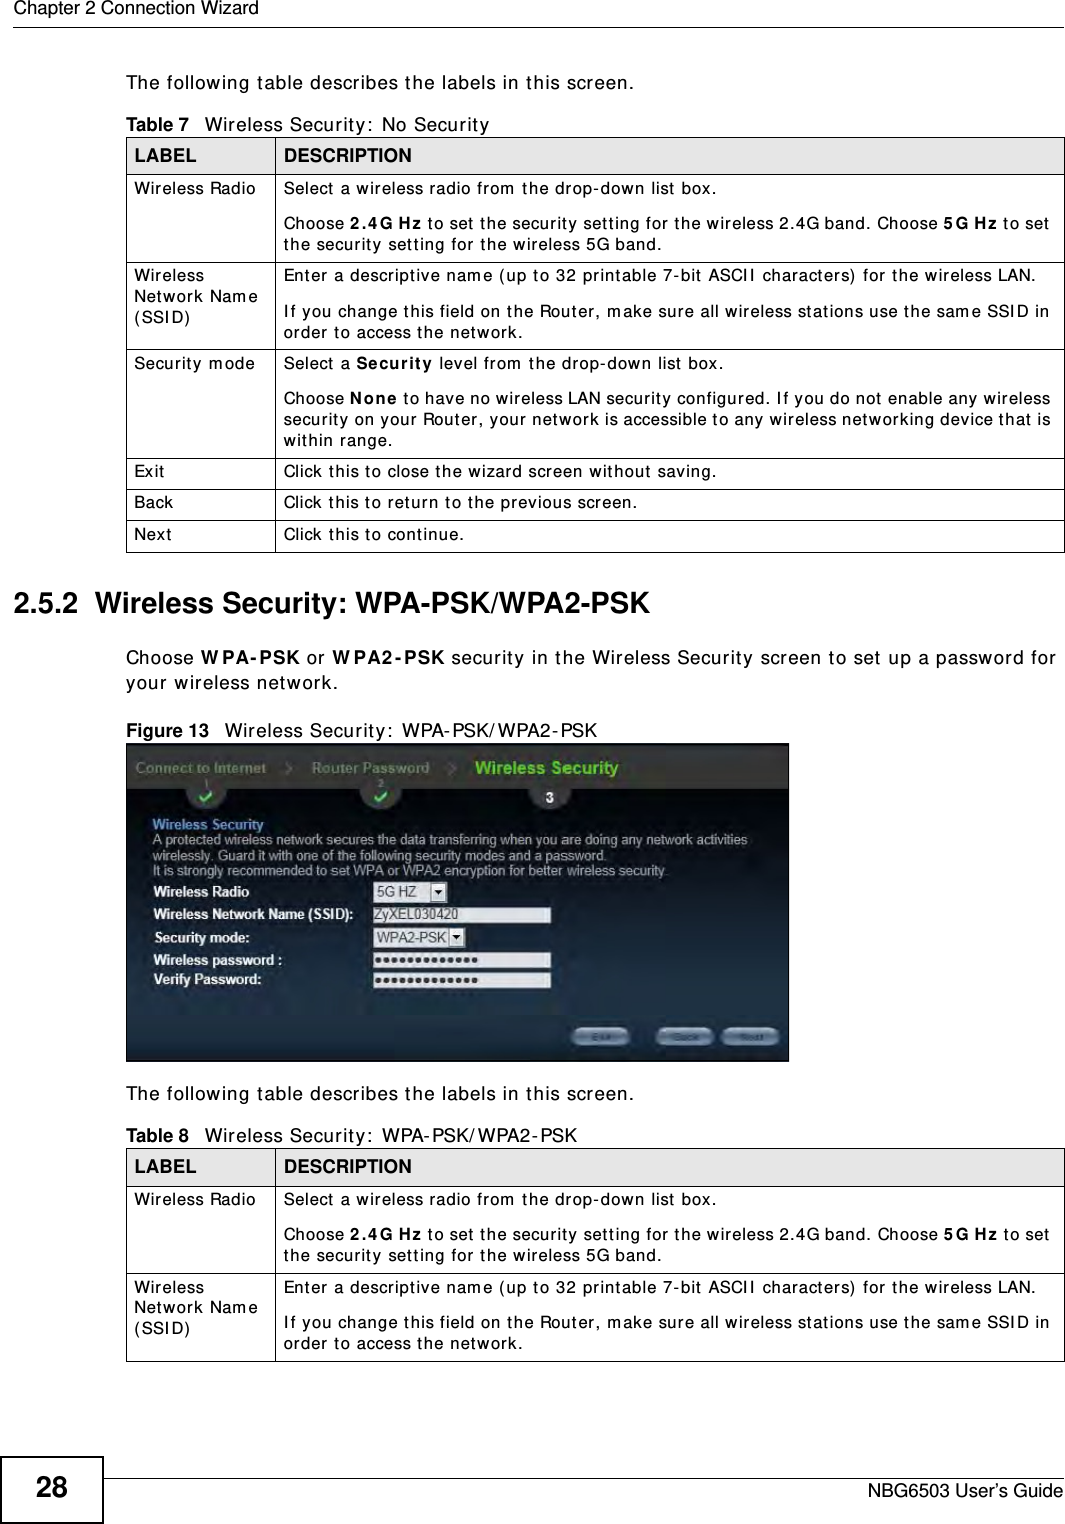 Chapter 2 Connection WizardNBG6503 User’s Guide28The following table describes the labels in this screen.2.5.2  Wireless Security: WPA-PSK/WPA2-PSKChoose WPA-PSK or WPA2-PSK security in the Wireless Security screen to set up a password for your wireless network.Figure 13   Wireless Security: WPA-PSK/WPA2-PSKThe following table describes the labels in this screen. Table 7   Wireless Security: No SecurityLABEL DESCRIPTIONWireless Radio Select a wireless radio from the drop-down list box.Choose 2.4G Hz to set the security setting for the wireless 2.4G band. Choose 5G Hz to set the security setting for the wireless 5G band.Wireless Network Name (SSID)Enter a descriptive name (up to 32 printable 7-bit ASCII characters) for the wireless LAN. If you change this field on the Router, make sure all wireless stations use the same SSID in order to access the network. Security mode Select a Security level from the drop-down list box. Choose None to have no wireless LAN security configured. If you do not enable any wireless security on your Router, your network is accessible to any wireless networking device that is within range. Exit Click this to close the wizard screen without saving.Back Click this to return to the previous screen.Next Click this to continue. Table 8   Wireless Security: WPA-PSK/WPA2-PSKLABEL DESCRIPTIONWireless Radio Select a wireless radio from the drop-down list box.Choose 2.4G Hz to set the security setting for the wireless 2.4G band. Choose 5G Hz to set the security setting for the wireless 5G band.Wireless Network Name (SSID)Enter a descriptive name (up to 32 printable 7-bit ASCII characters) for the wireless LAN. If you change this field on the Router, make sure all wireless stations use the same SSID in order to access the network. 